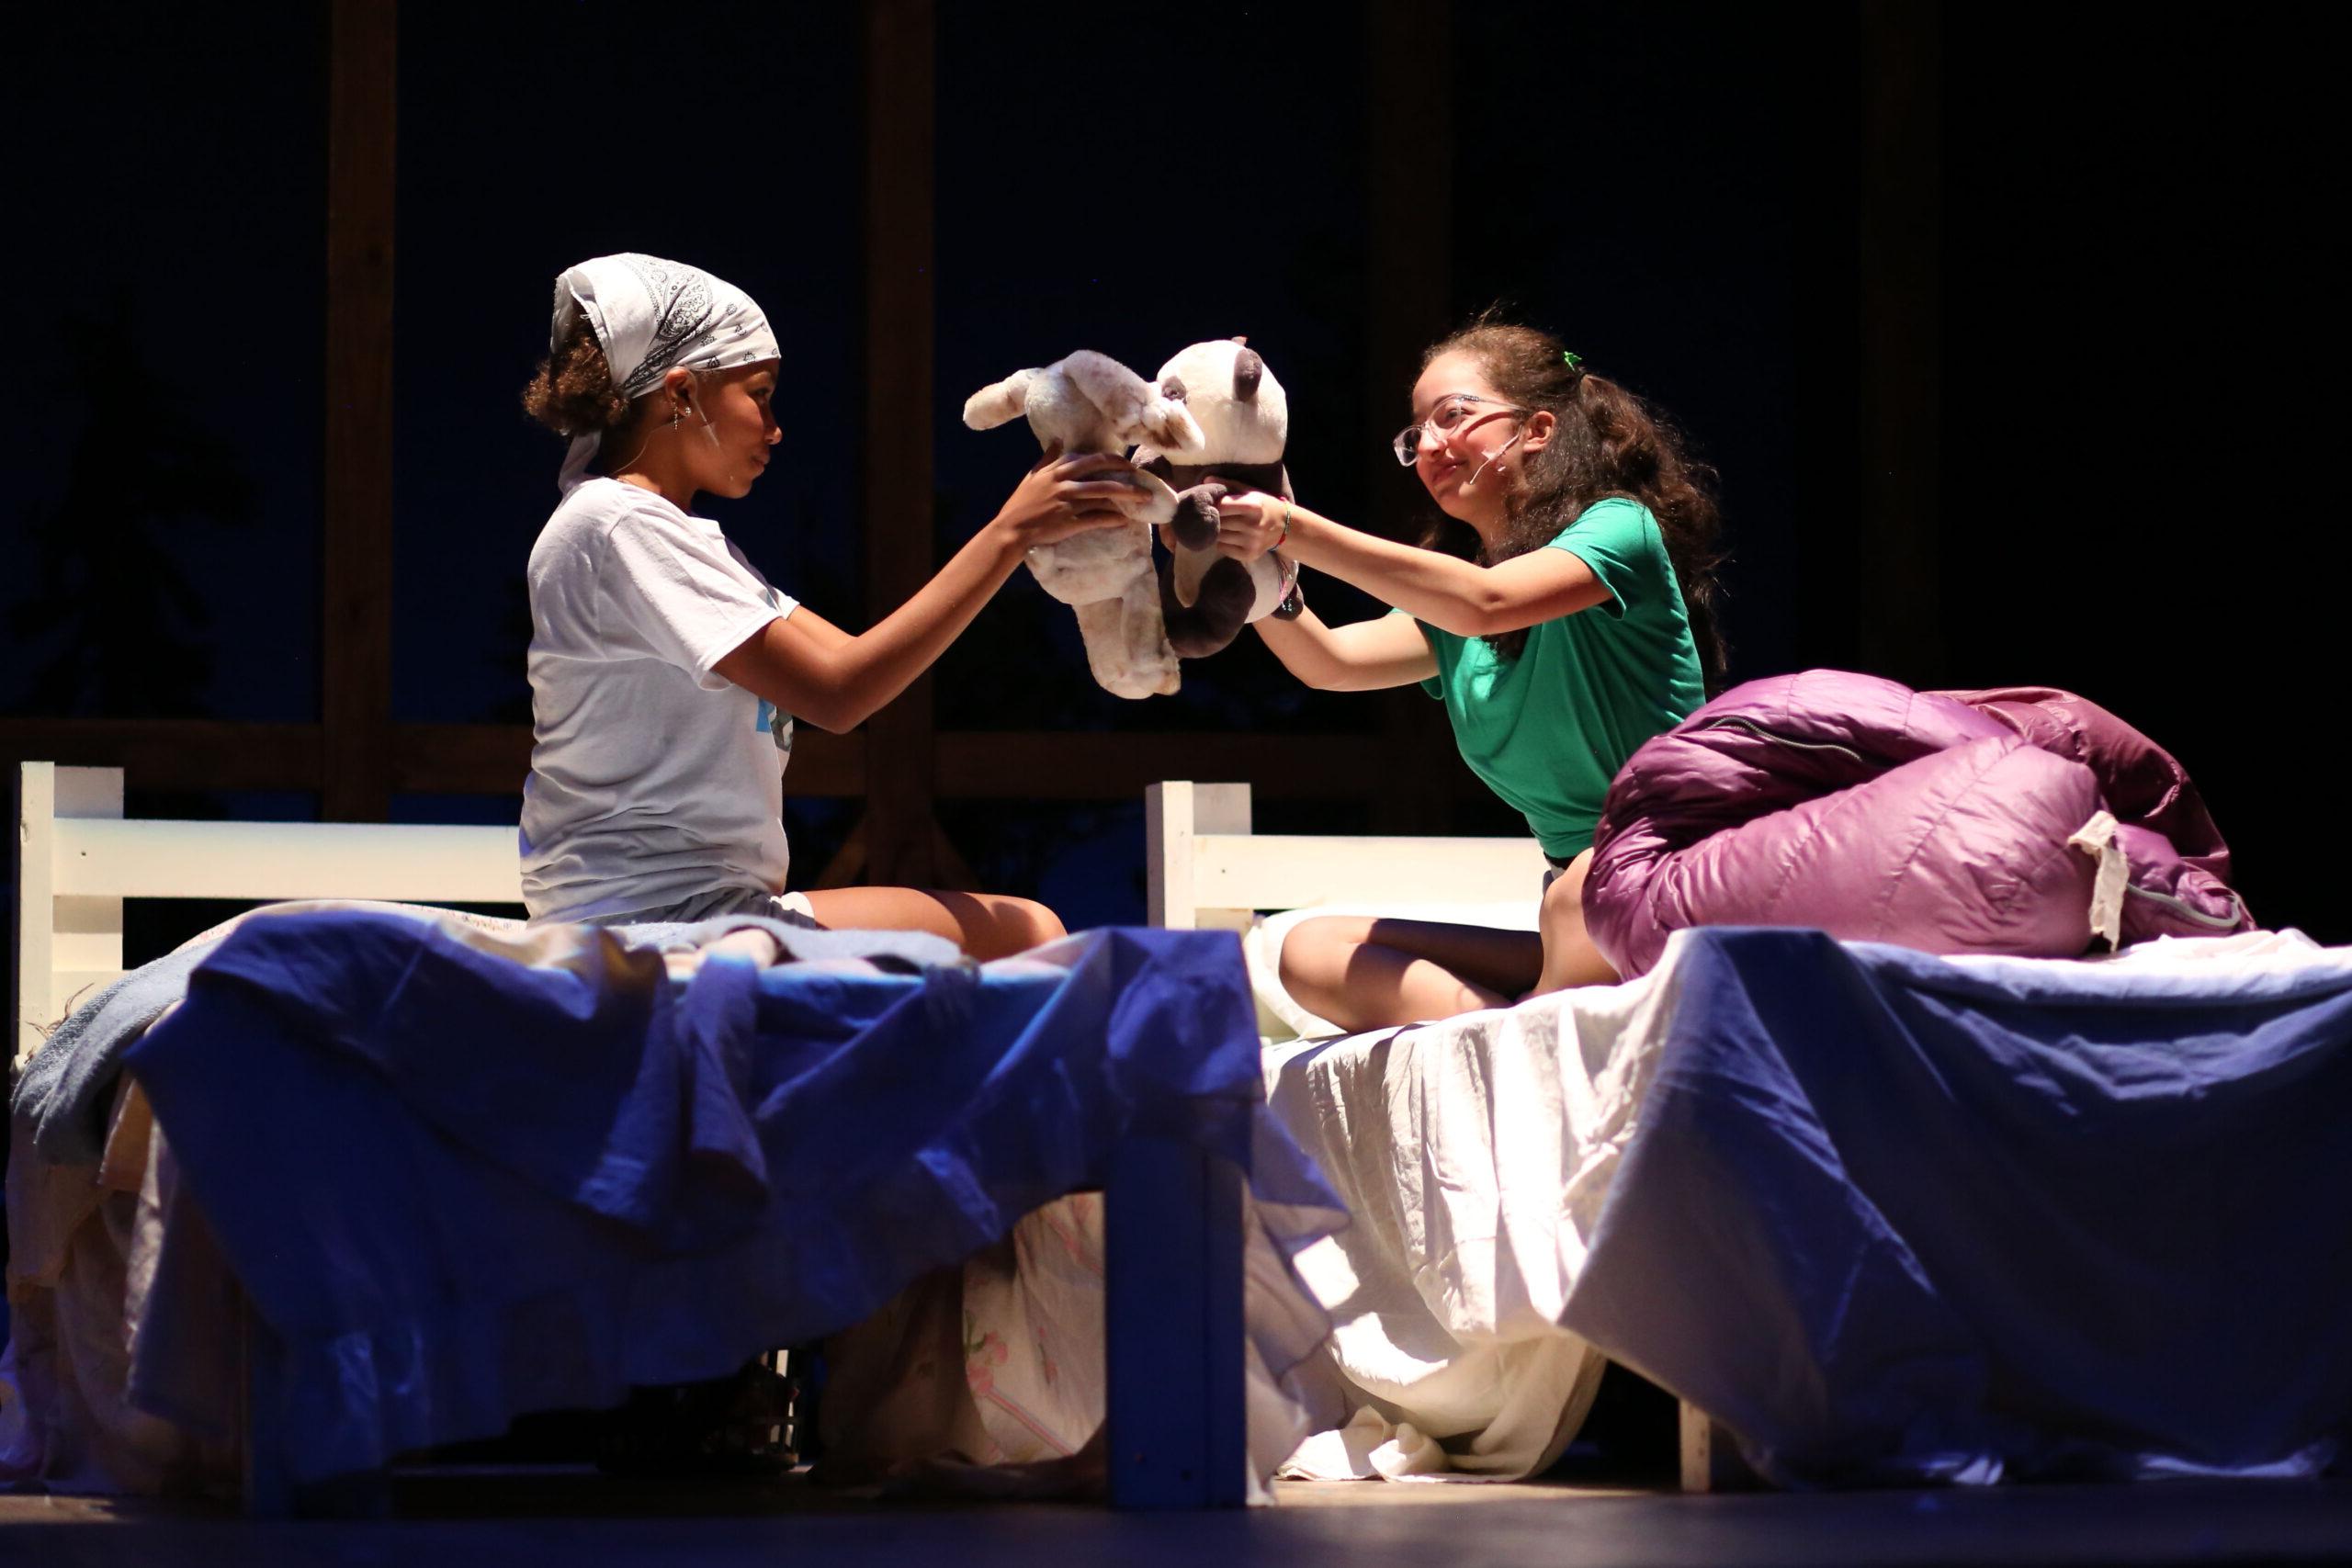 Fieldston Upper students sitting on beds, holding up stuffed animals, while on stage during the fall drama theatre production at the Ethical Culture Fieldston School